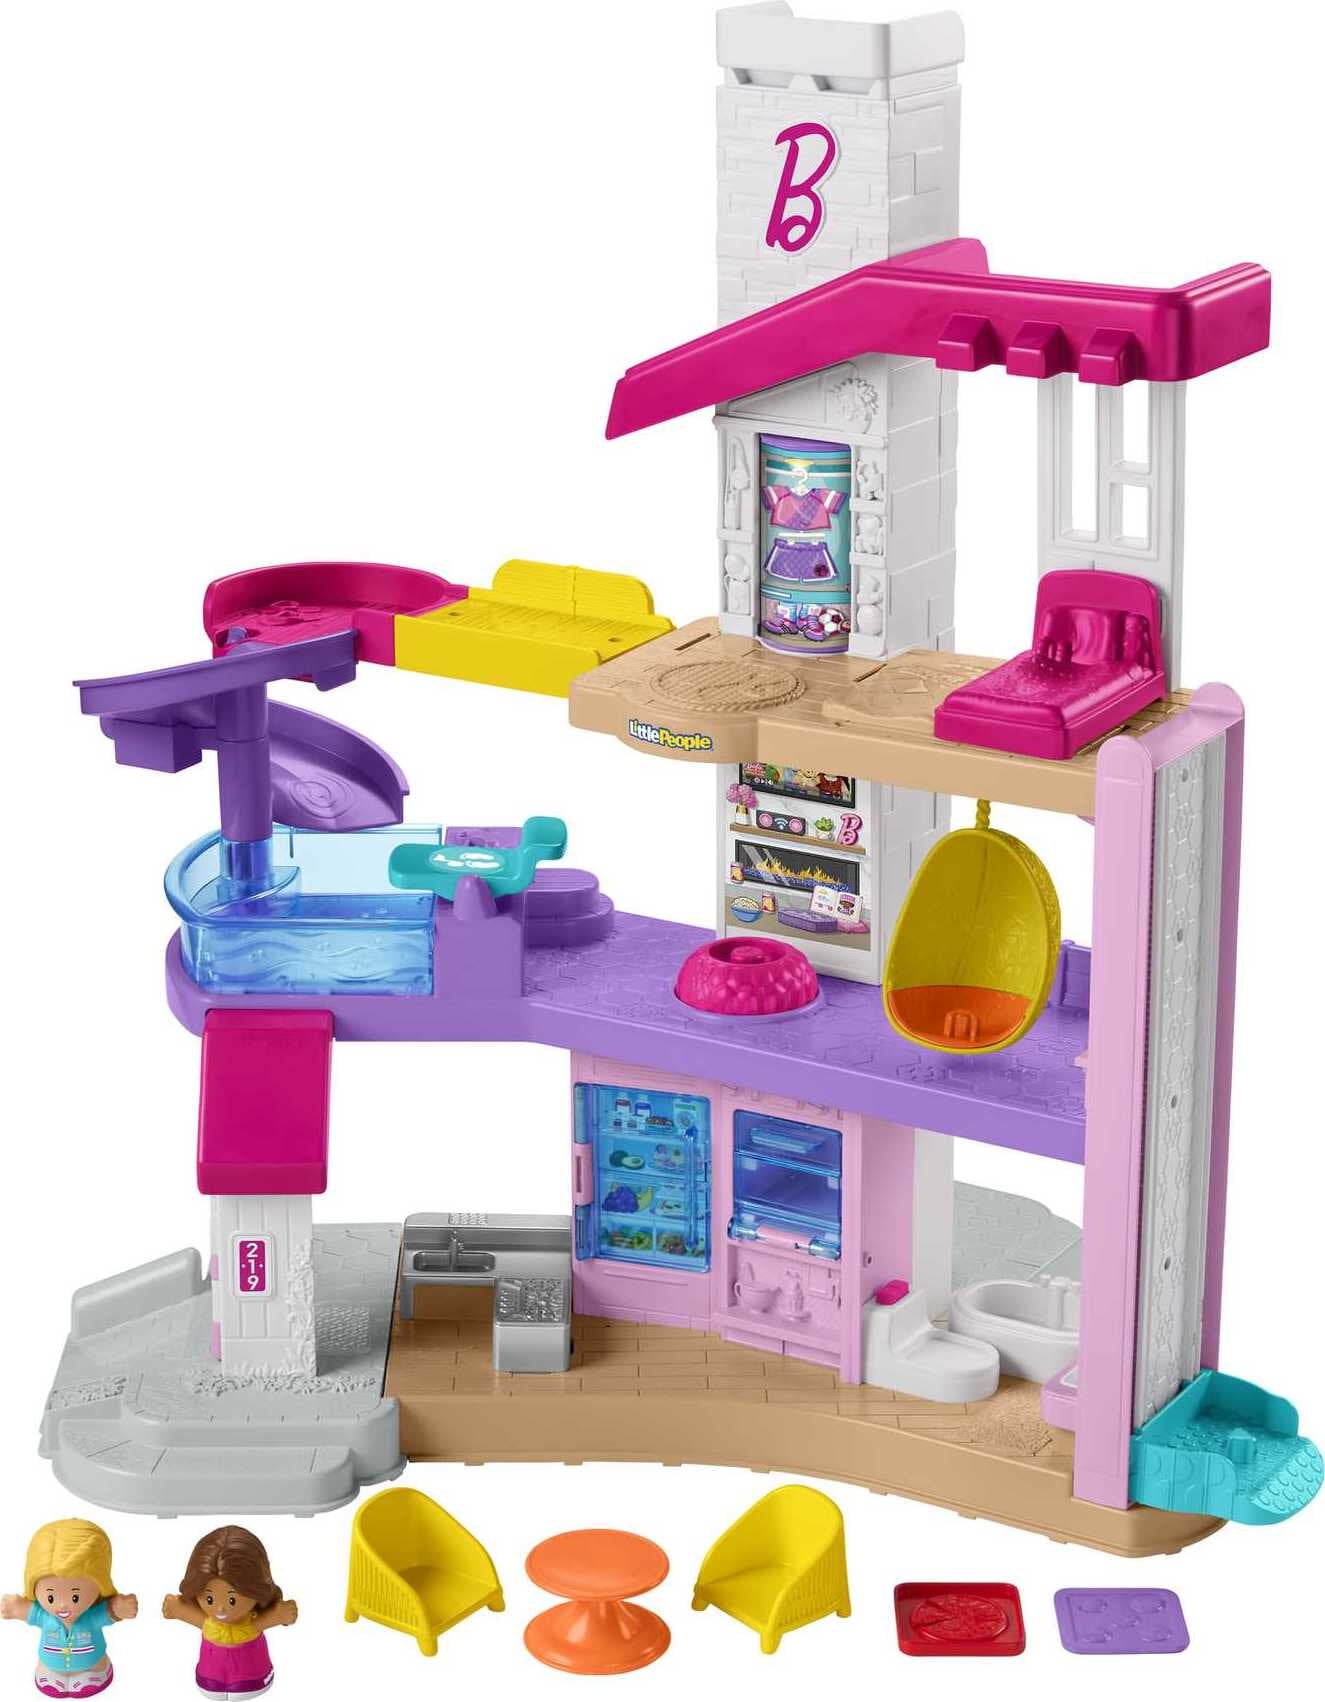 Picture of Mattel HCF61 Barbie Little DreamHouse Playset by Little People